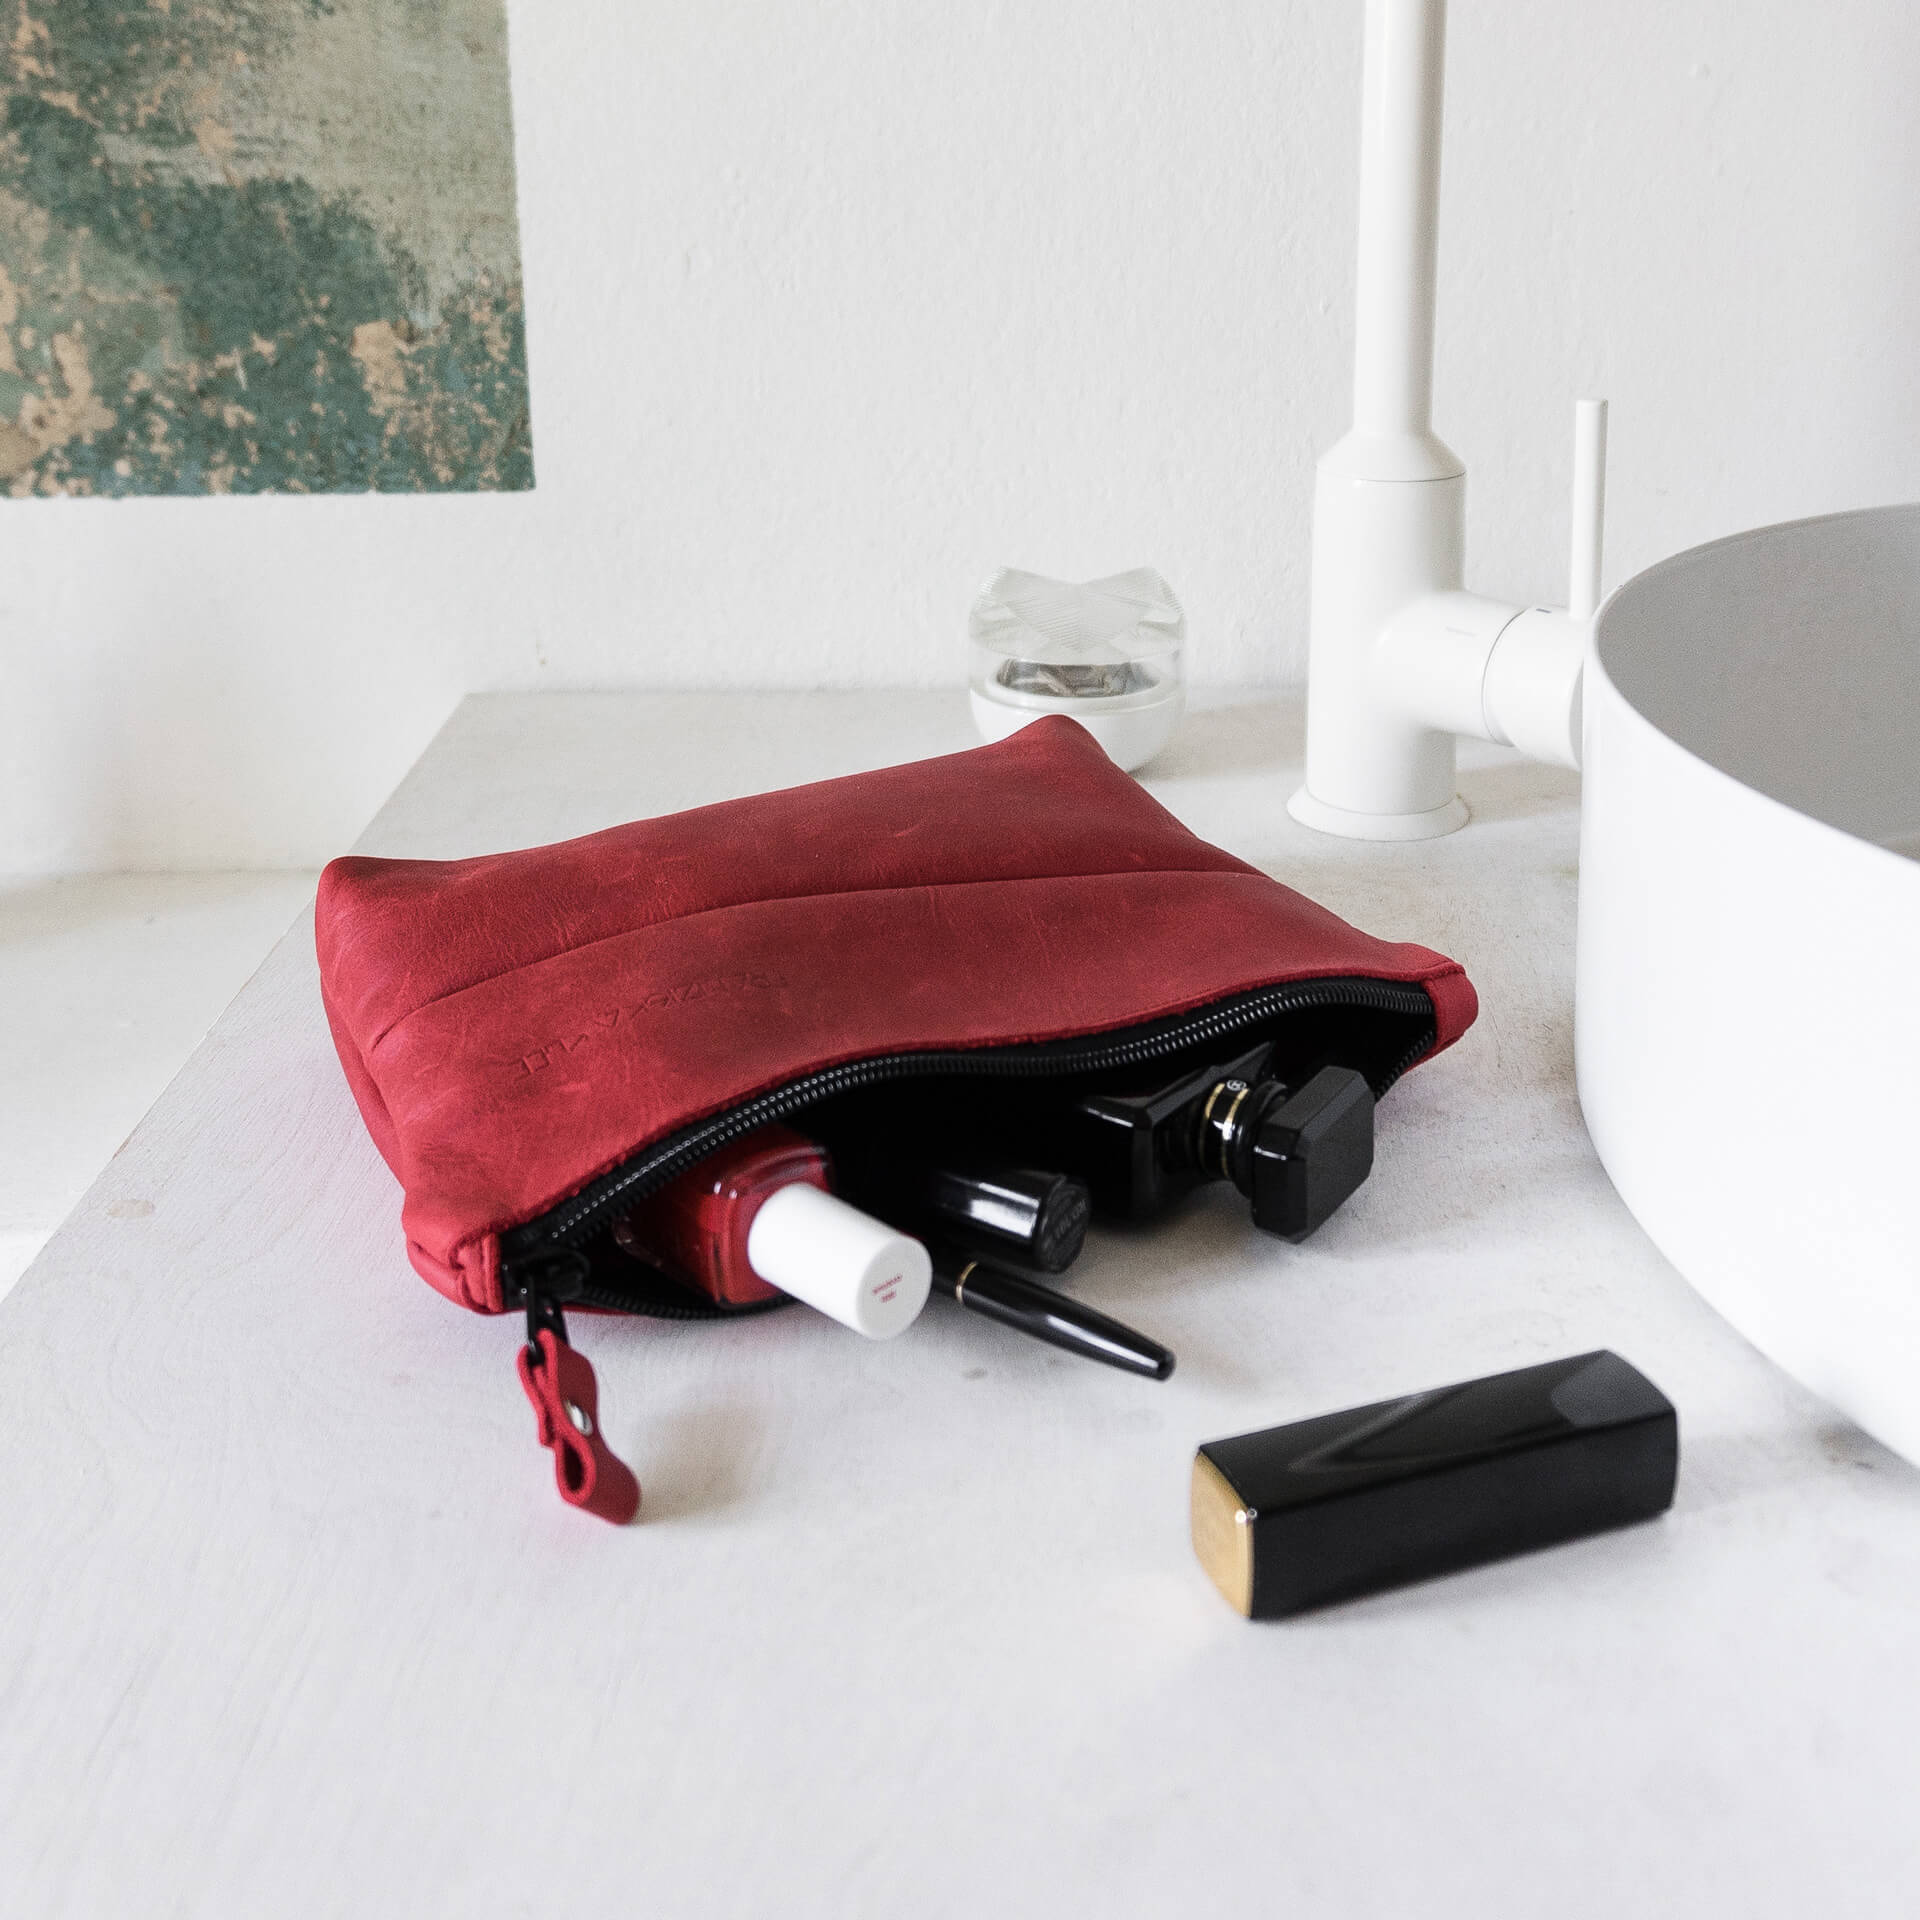 If your toiletry bag is a touch smaller, we recommend our Pouch FRA.